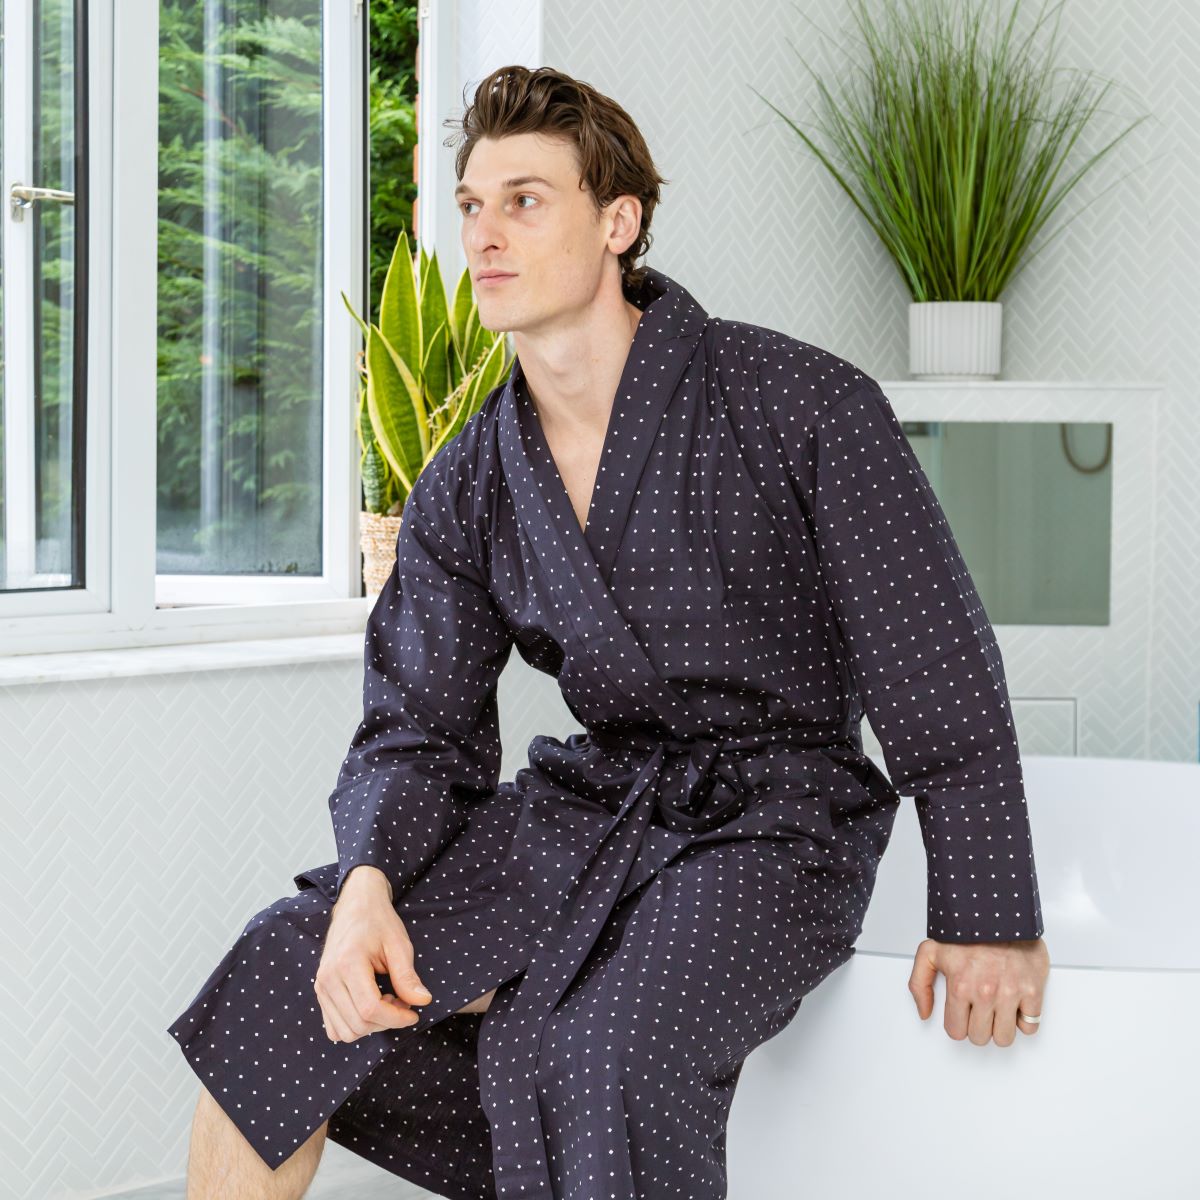 3/4 Sleeved Gray and Black Colour Turkish Cotton Jacquard Lightweight  Bathrobe, Short Dressing Gown. - Etsy